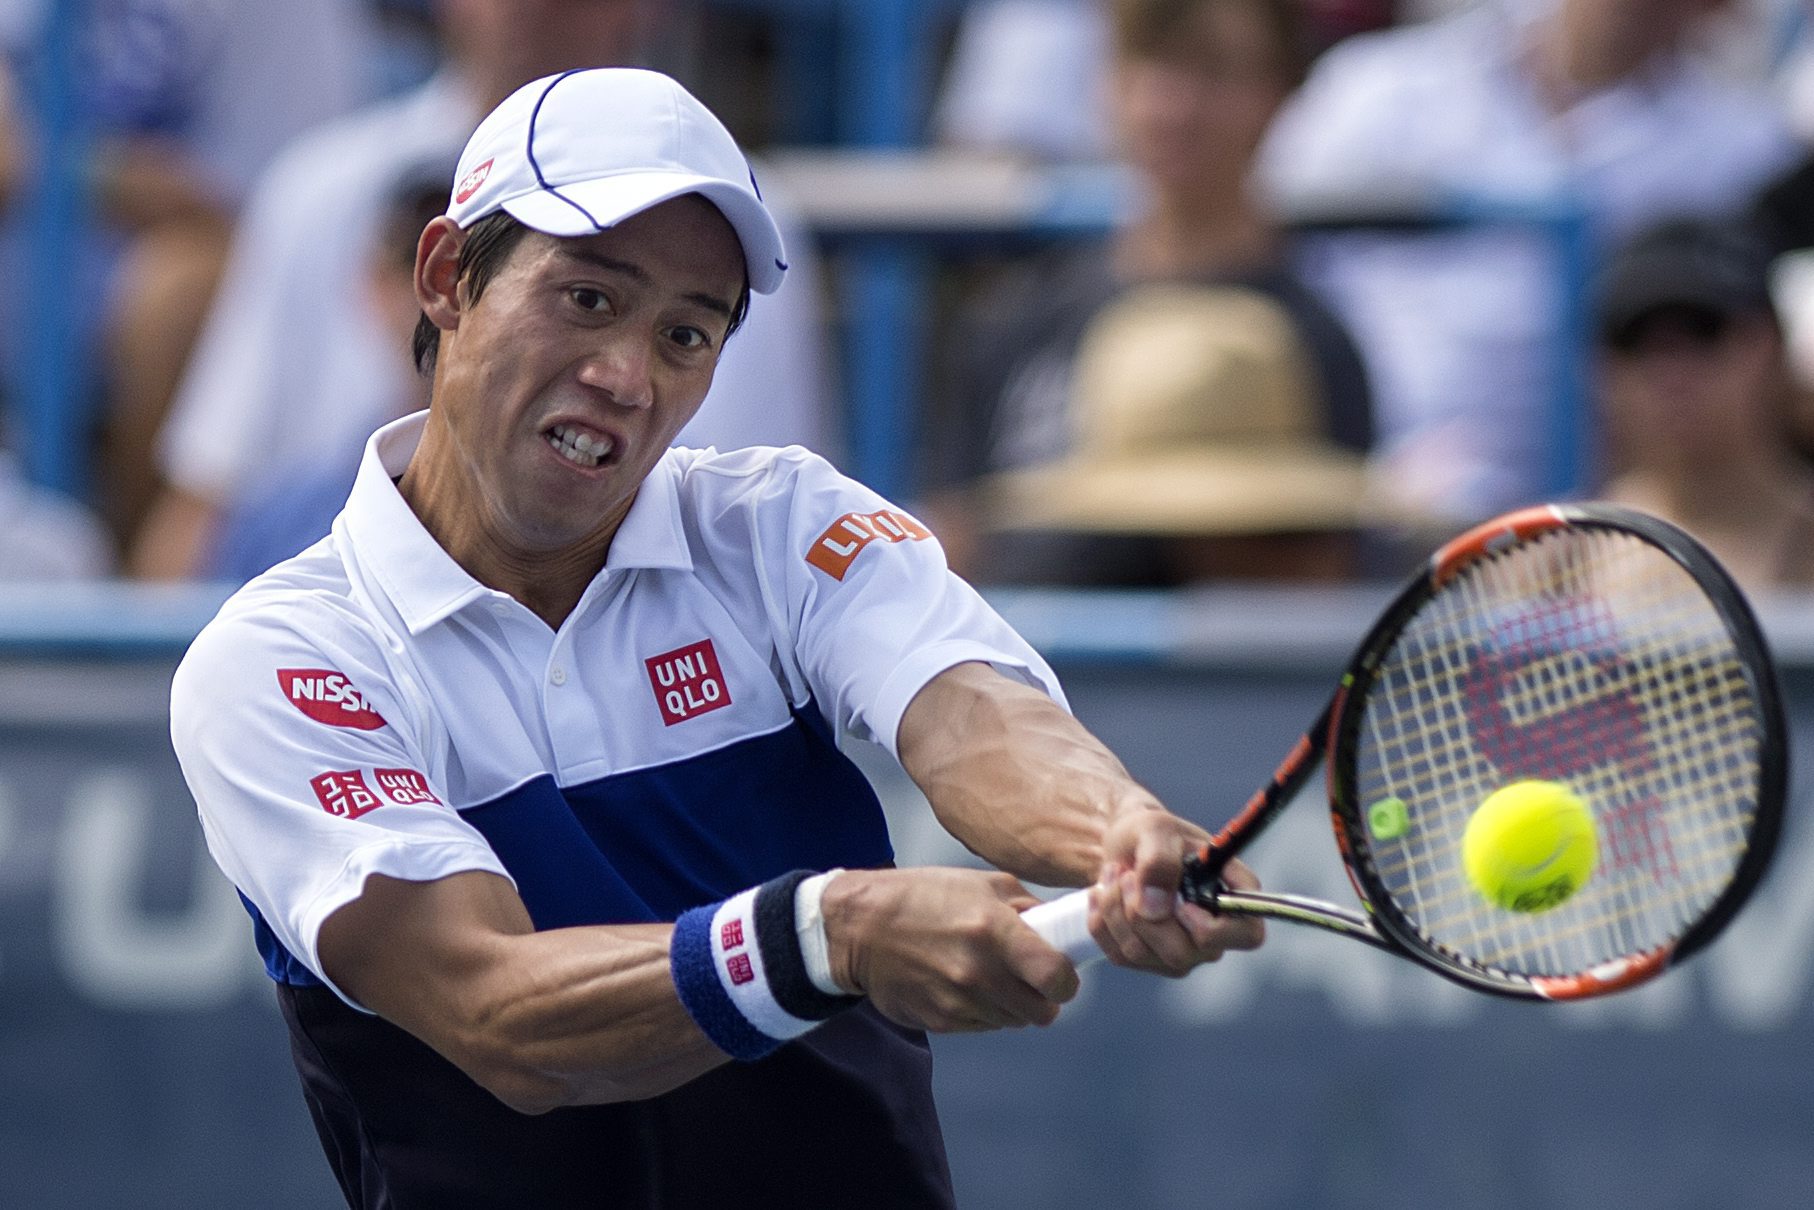 Kei Nishikori notches up 10th ATP title with victory over John Isner in Washington Open South China Morning Post